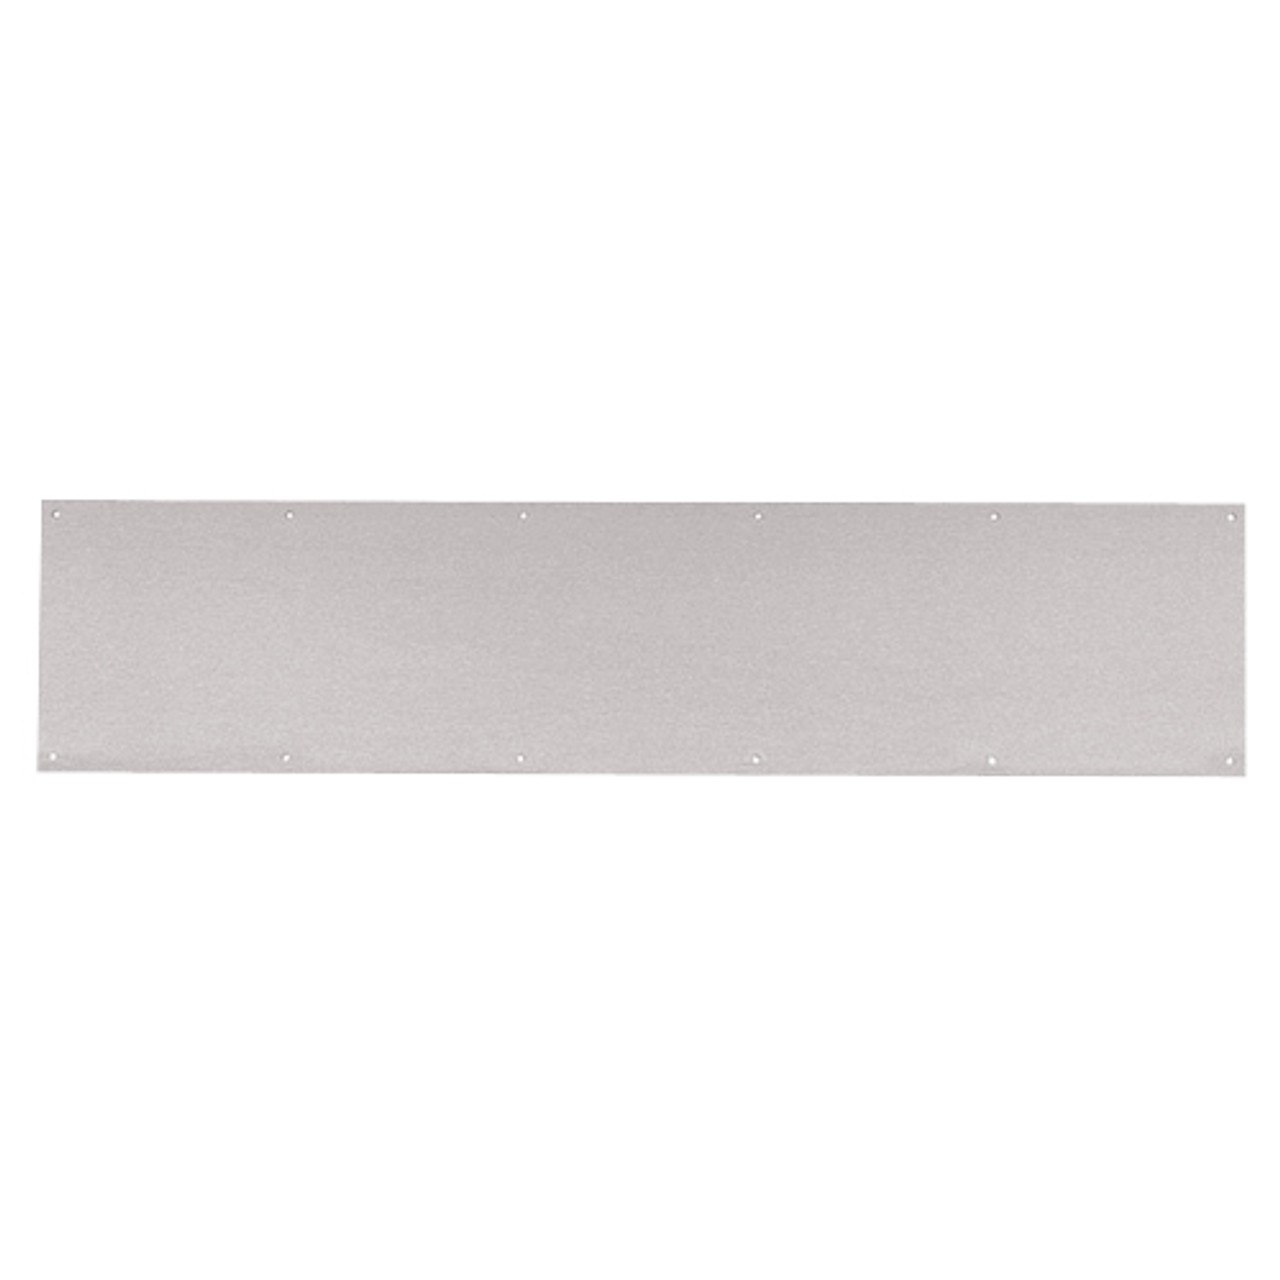 8400-US32D-16x36-B-CS Ives 8400 Series Protection Plate in Satin Stainless Steel